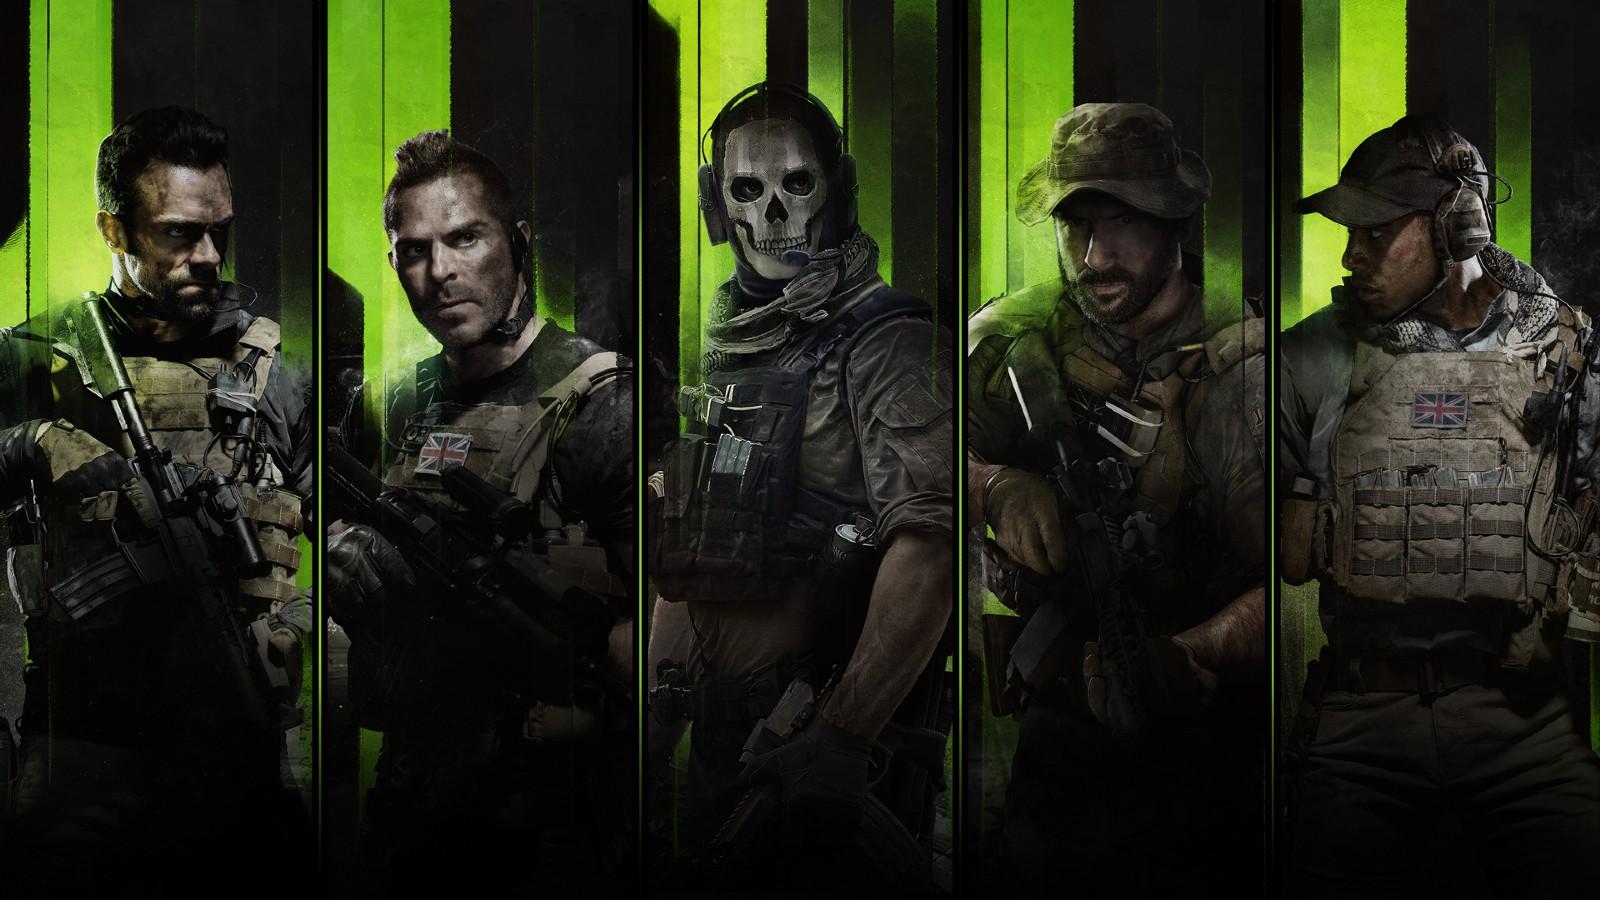 Call Of Duty: Modern Warfare 3 free to download and play ahead of launch